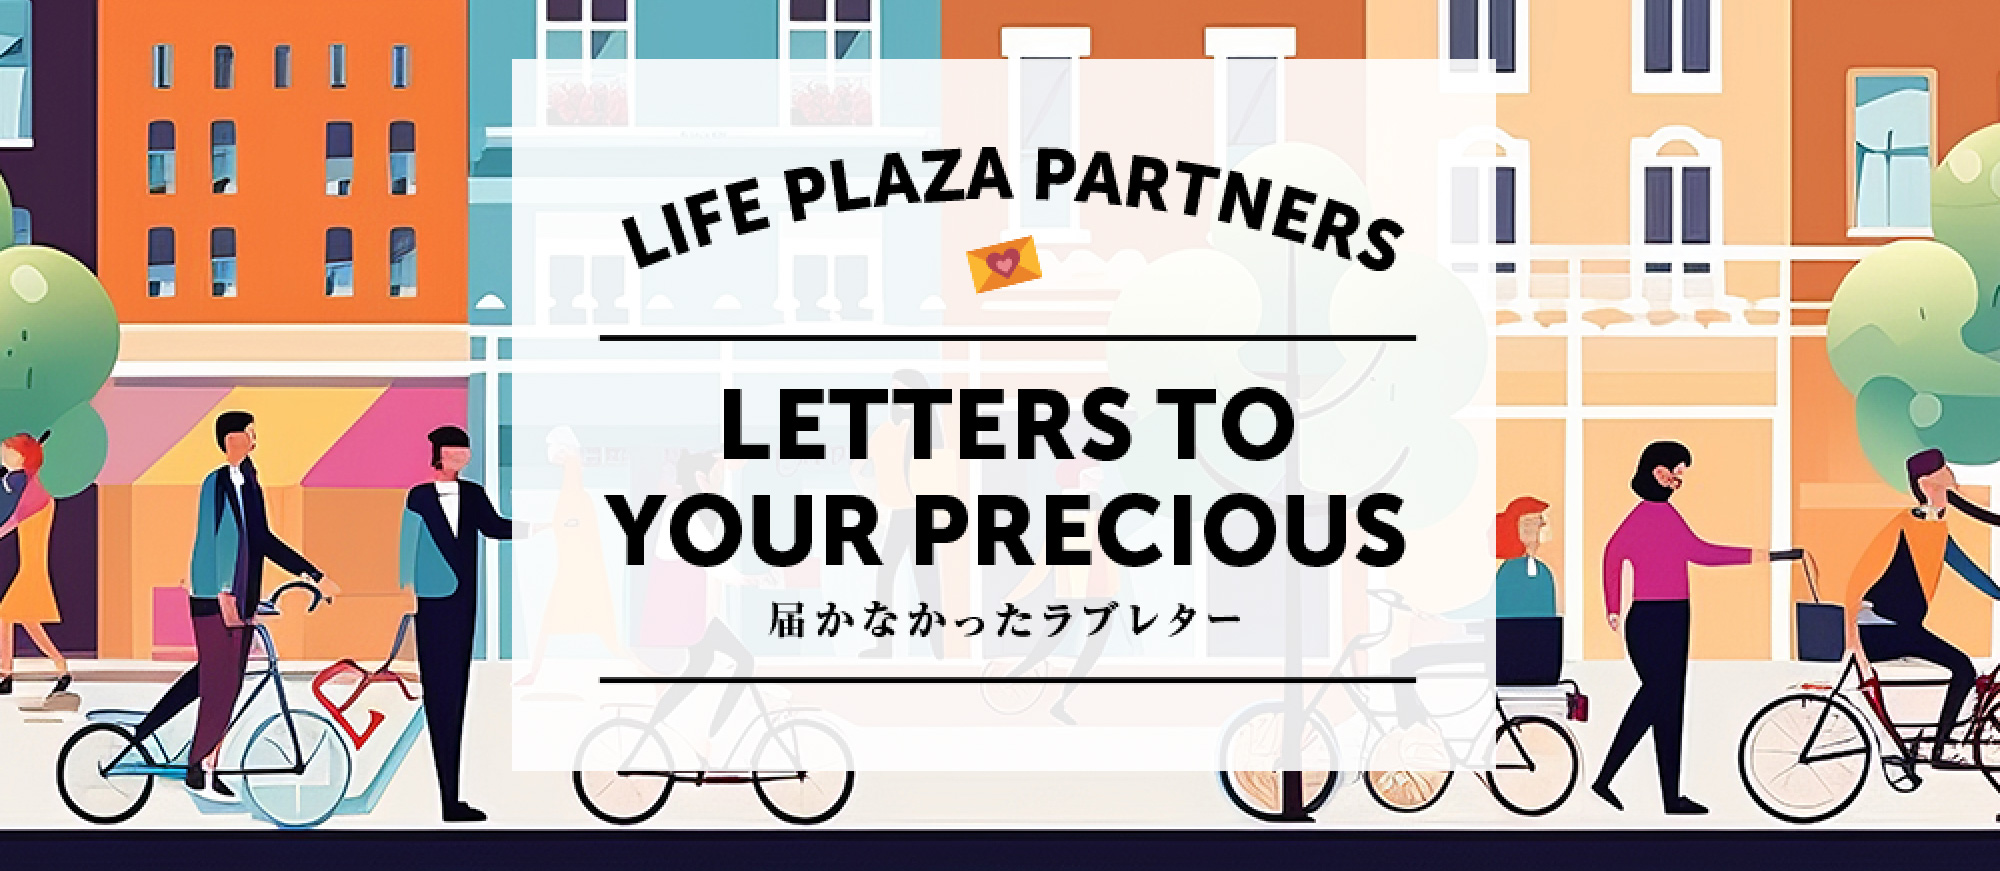 LIFE PLAZA PARTNERS LETTERS TO YOUR PRECIOUS | SATURDAY 07:50 - 08:00